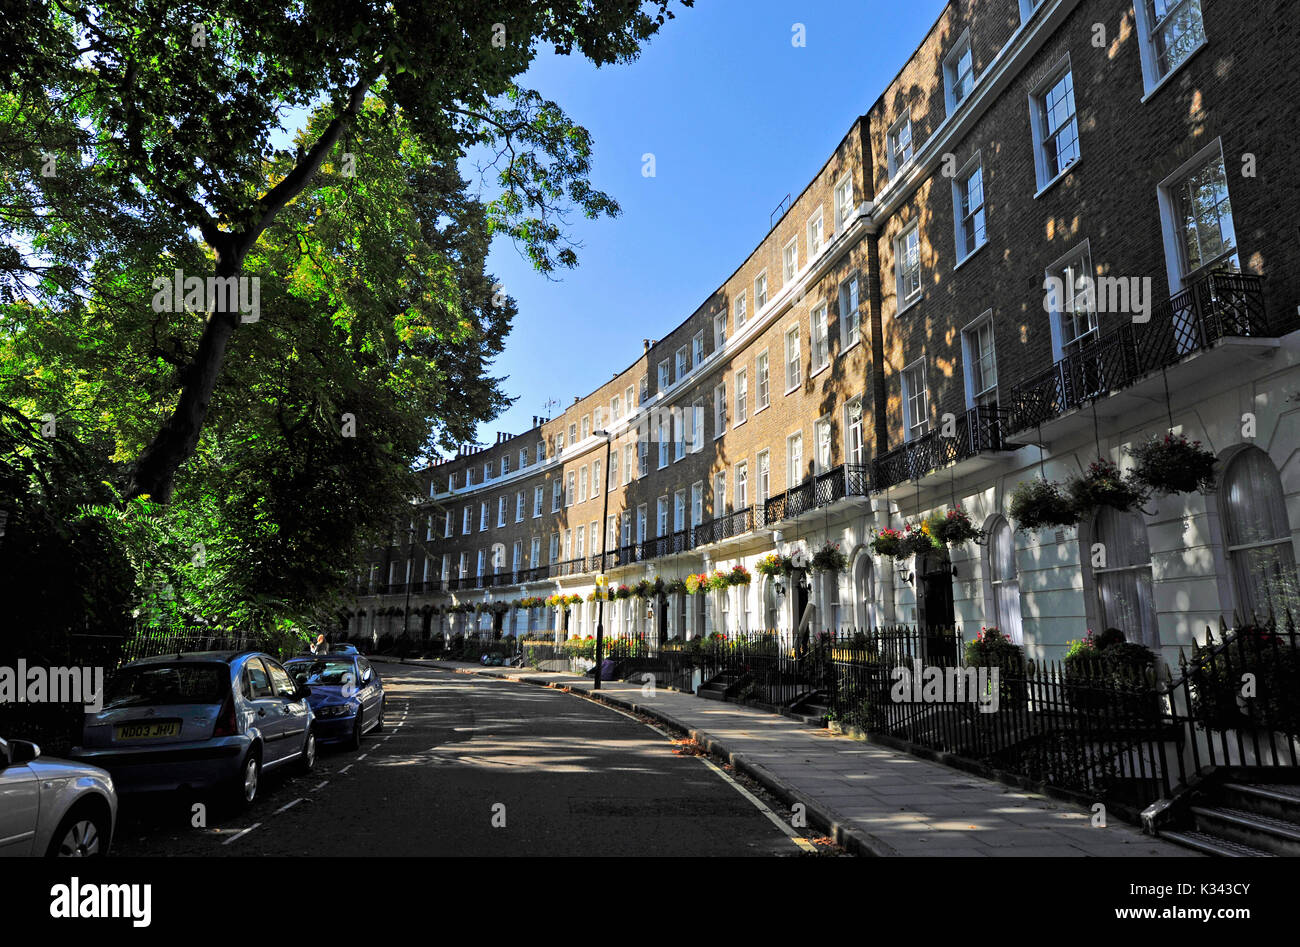 London UK - Picturesque terraced houses in Cartwright Gardens in Bloomsbury district of London between Russell Square and Kings Cross Stock Photo